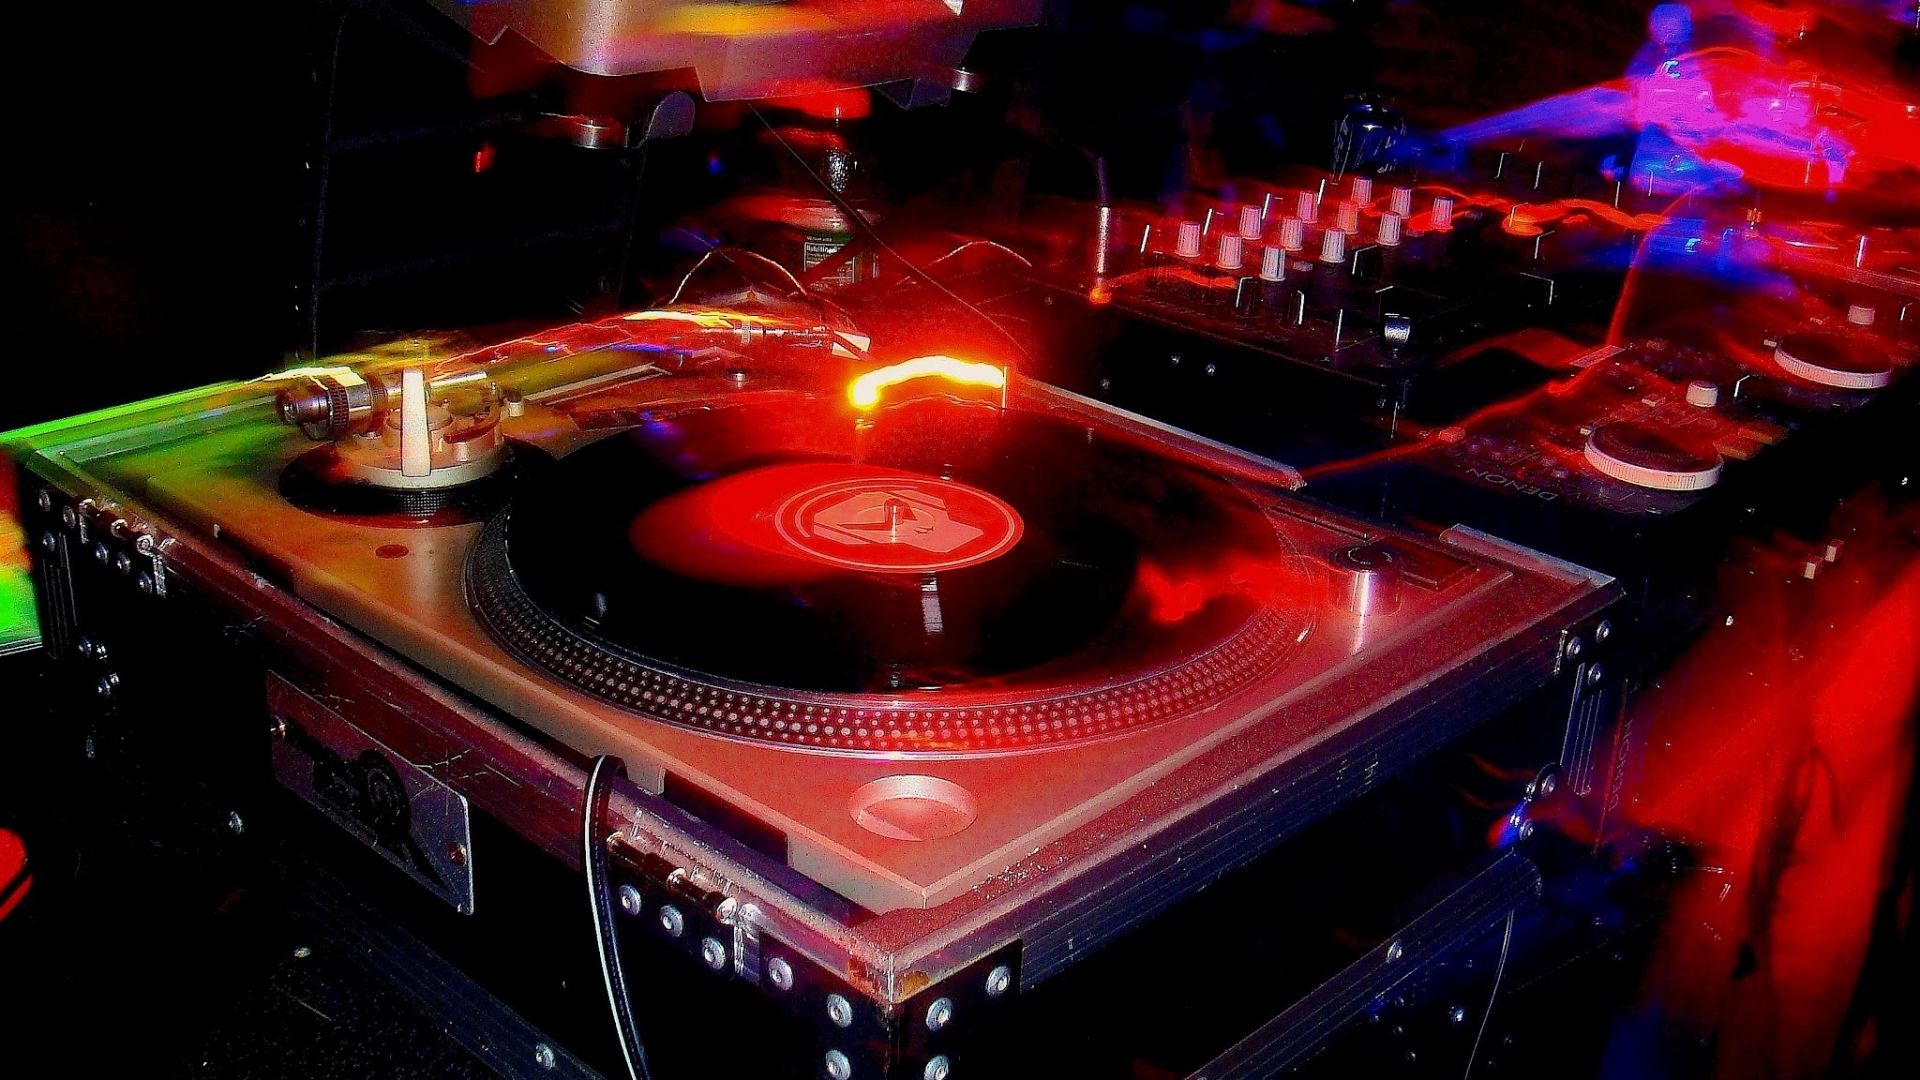 Free download cool dj turntable wallpaper turntable wallpaper Car Picture [2048x1536] for your Desktop, Mobile & Tablet. Explore DJ Turntables Wallpaper. DJ Turntables Wallpaper, Dj Wallpaper, Dj Background